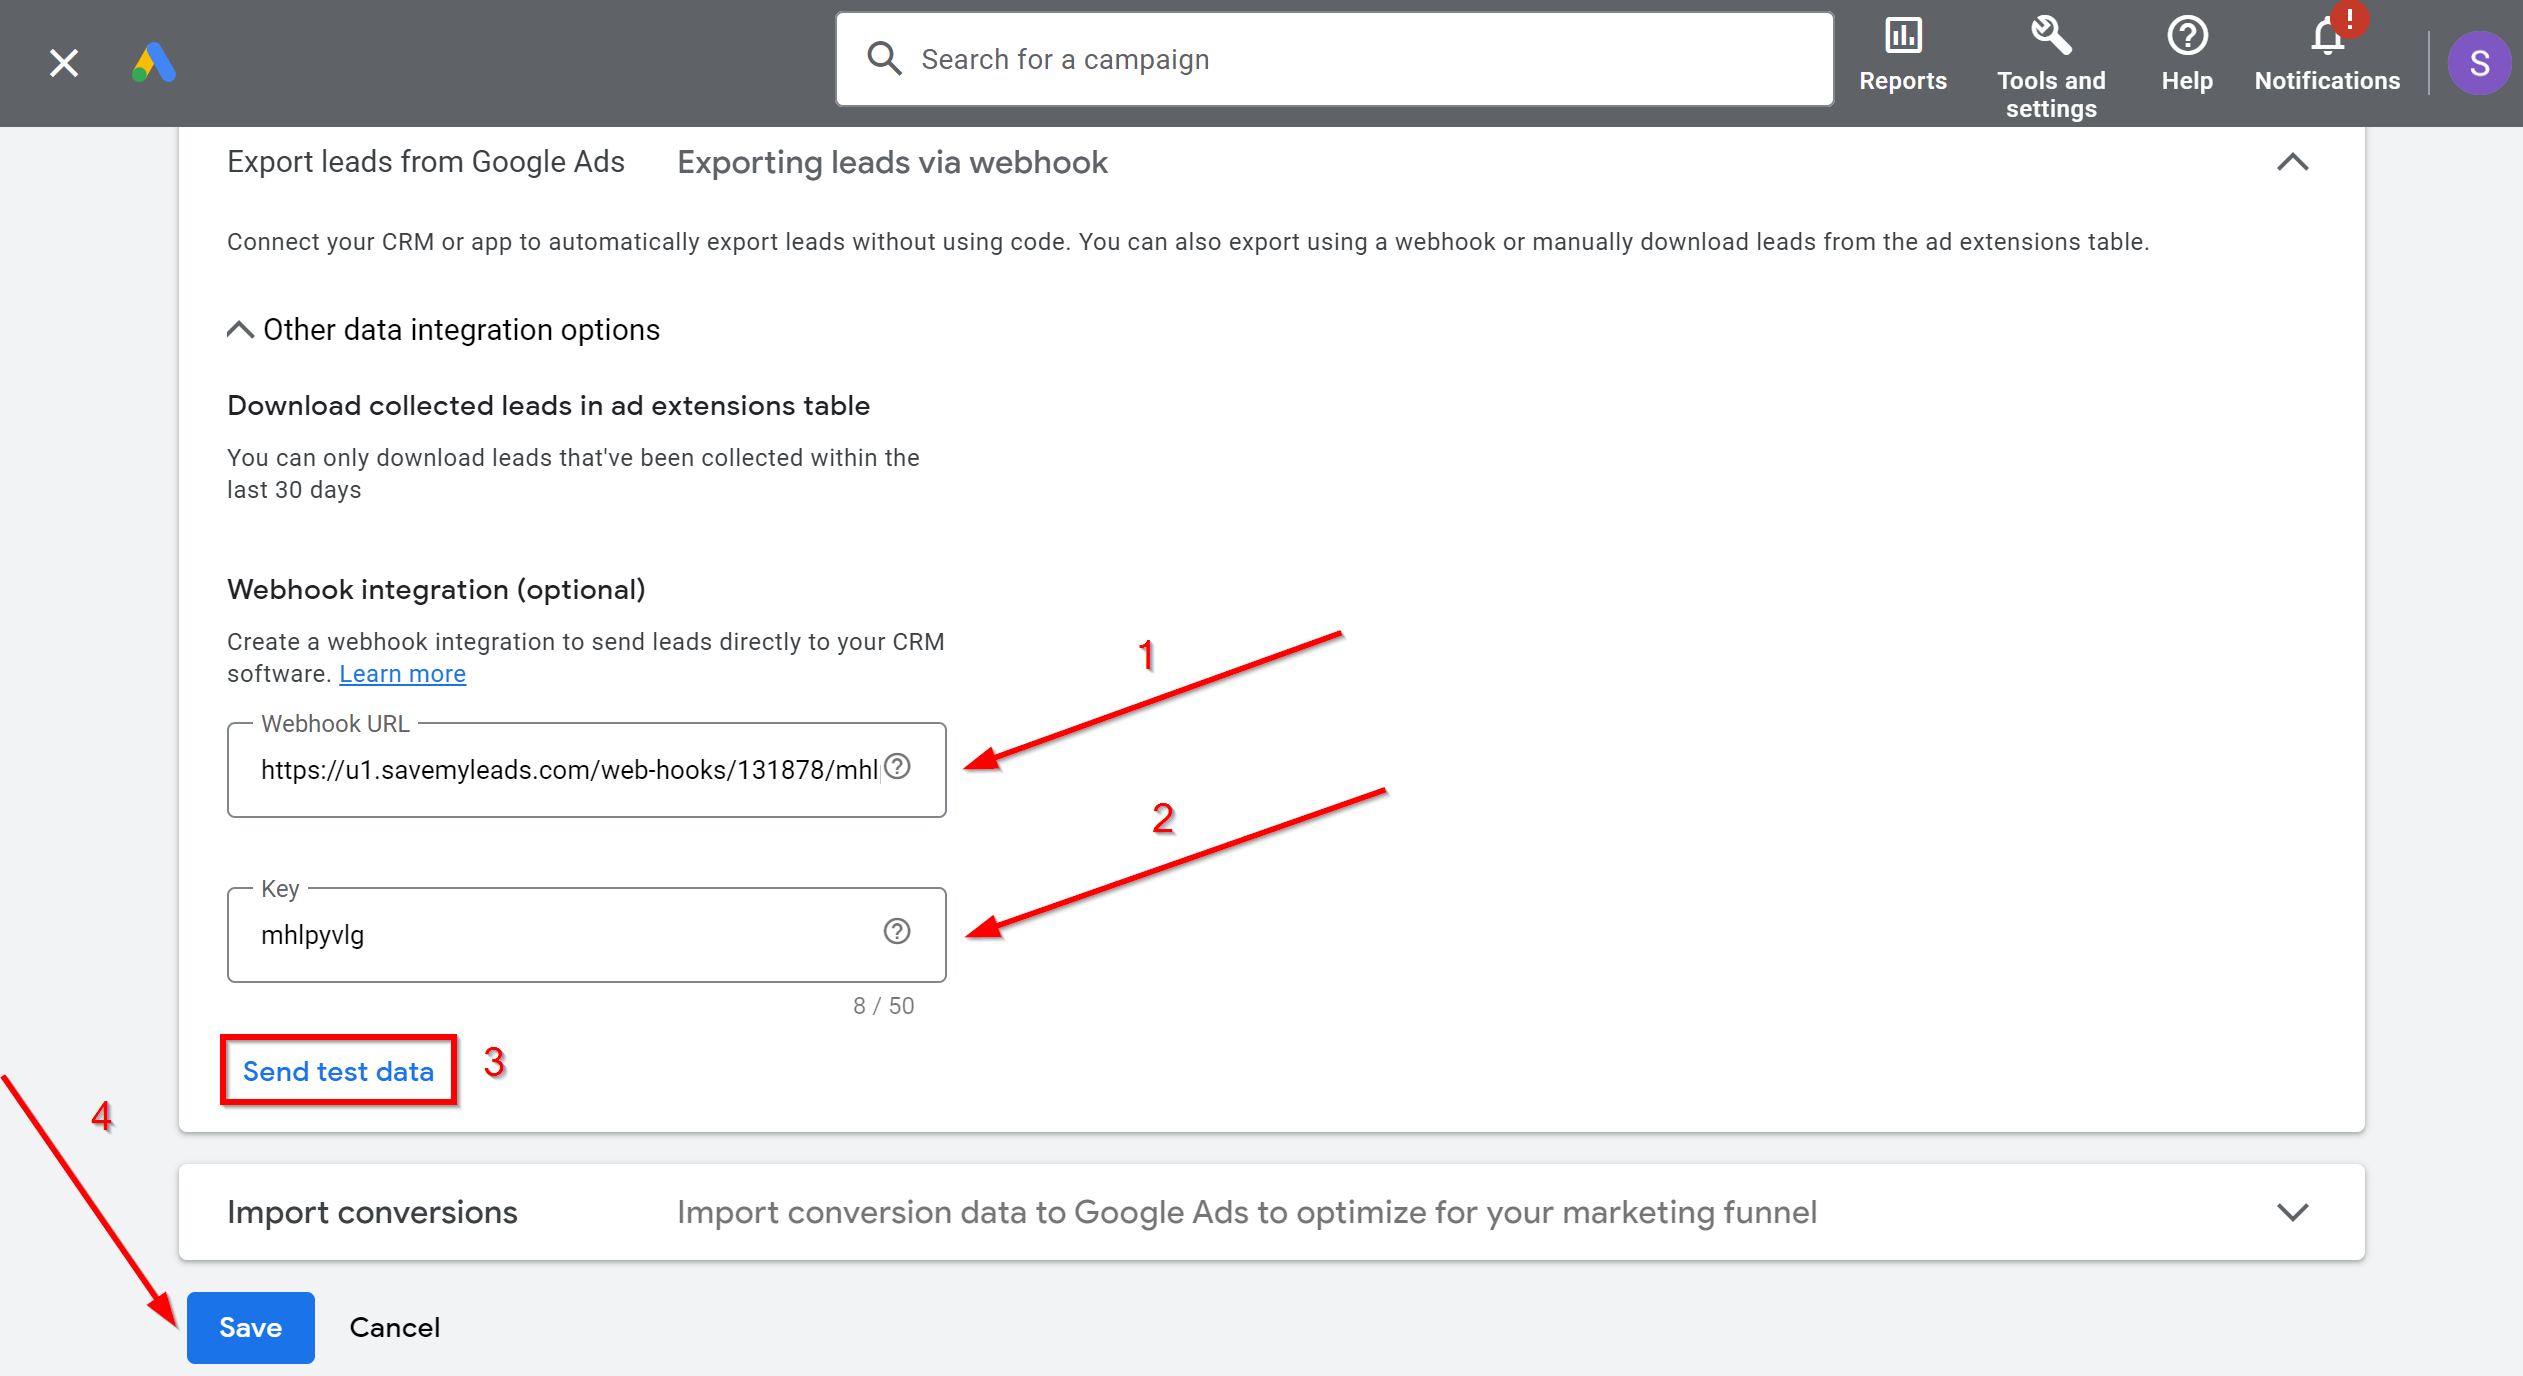 How to Connect Google Lead Form with Instasent | Data Source account connection